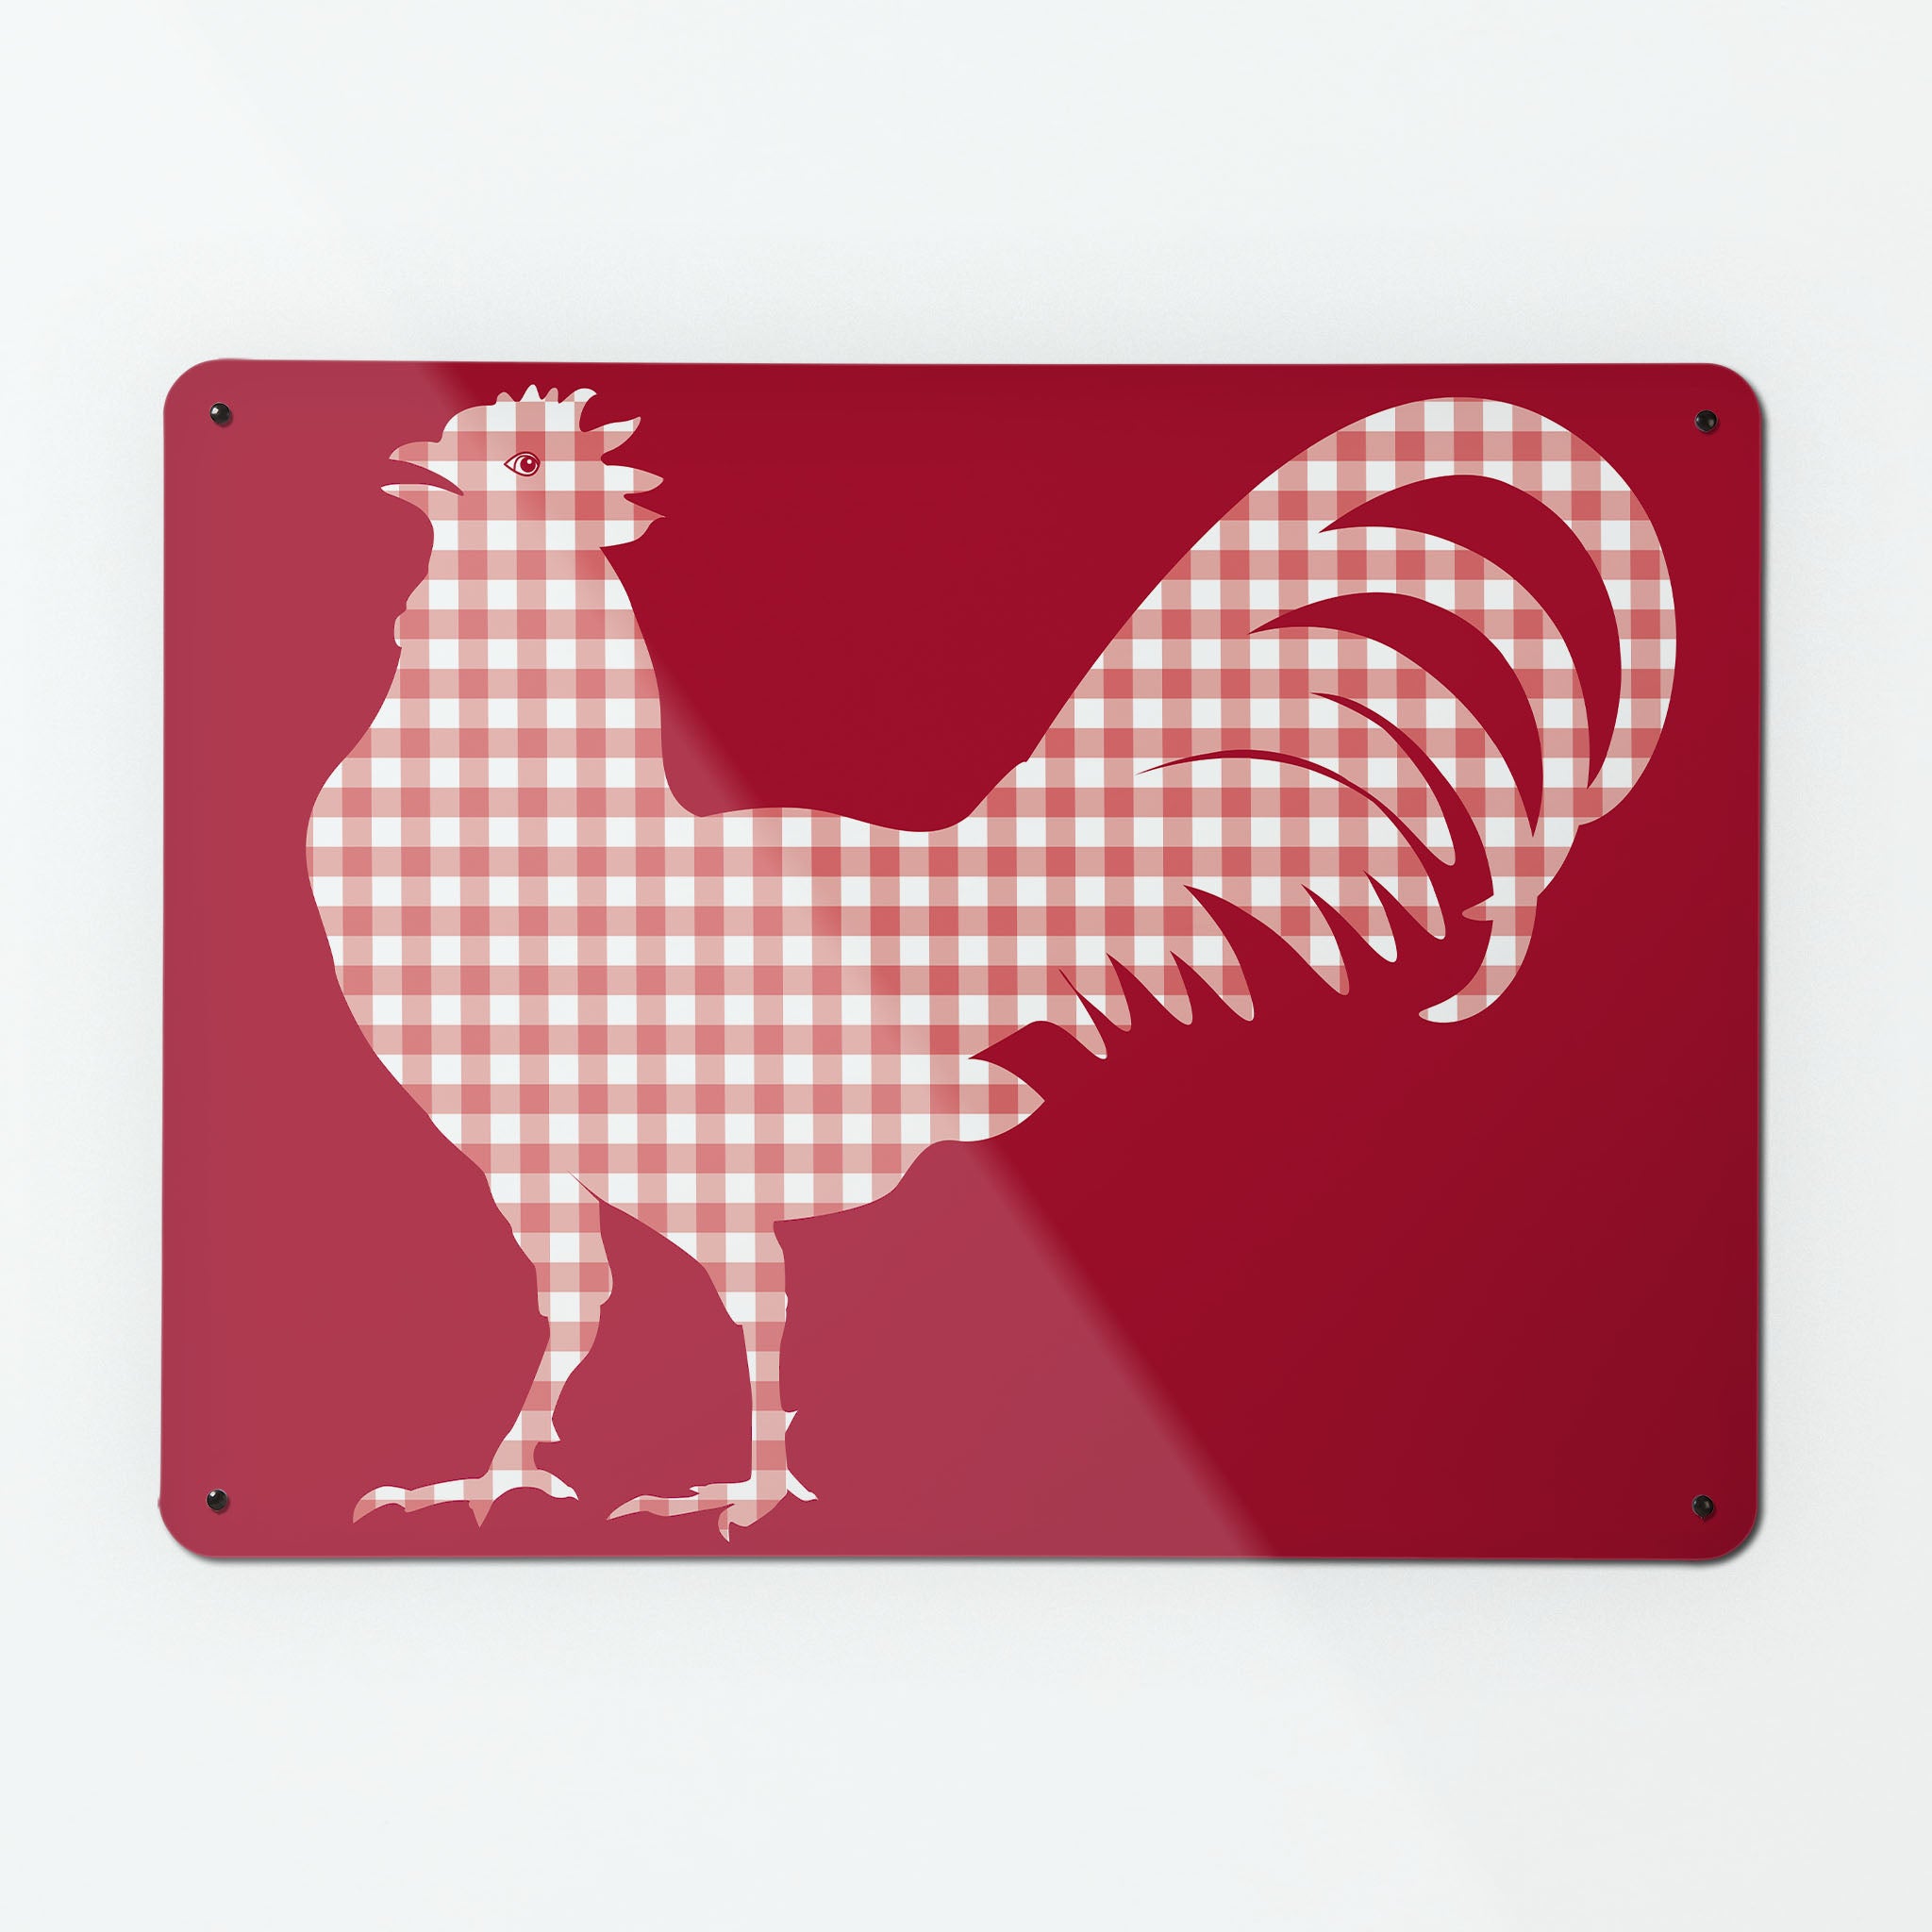 A large magnetic notice board by Beyond the Fridge with a red gingham cockerel design